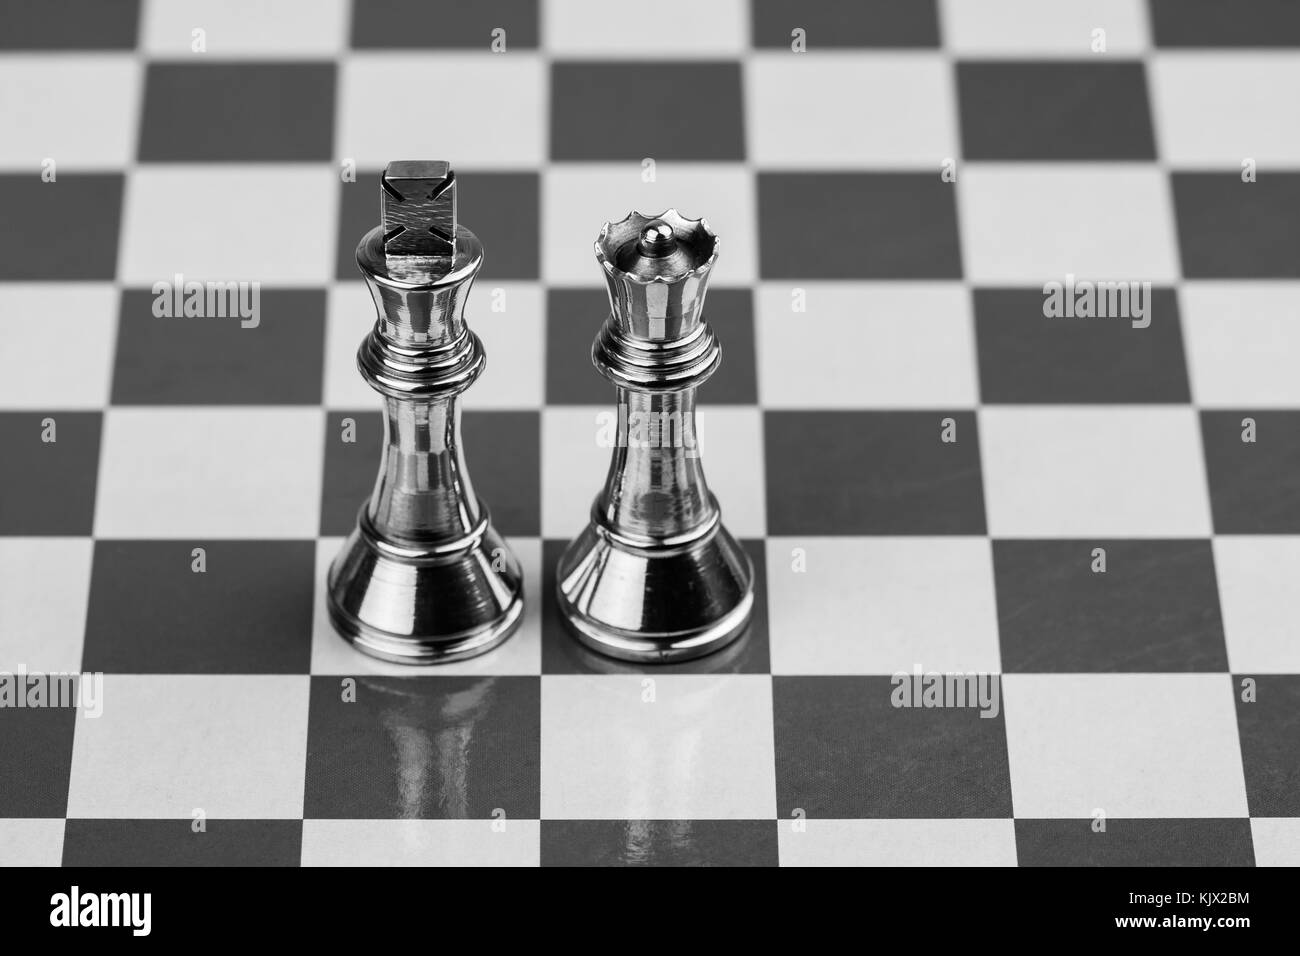 King and Queen - Rugged brass chess king and queen pieces on a chess board. Stock Photo